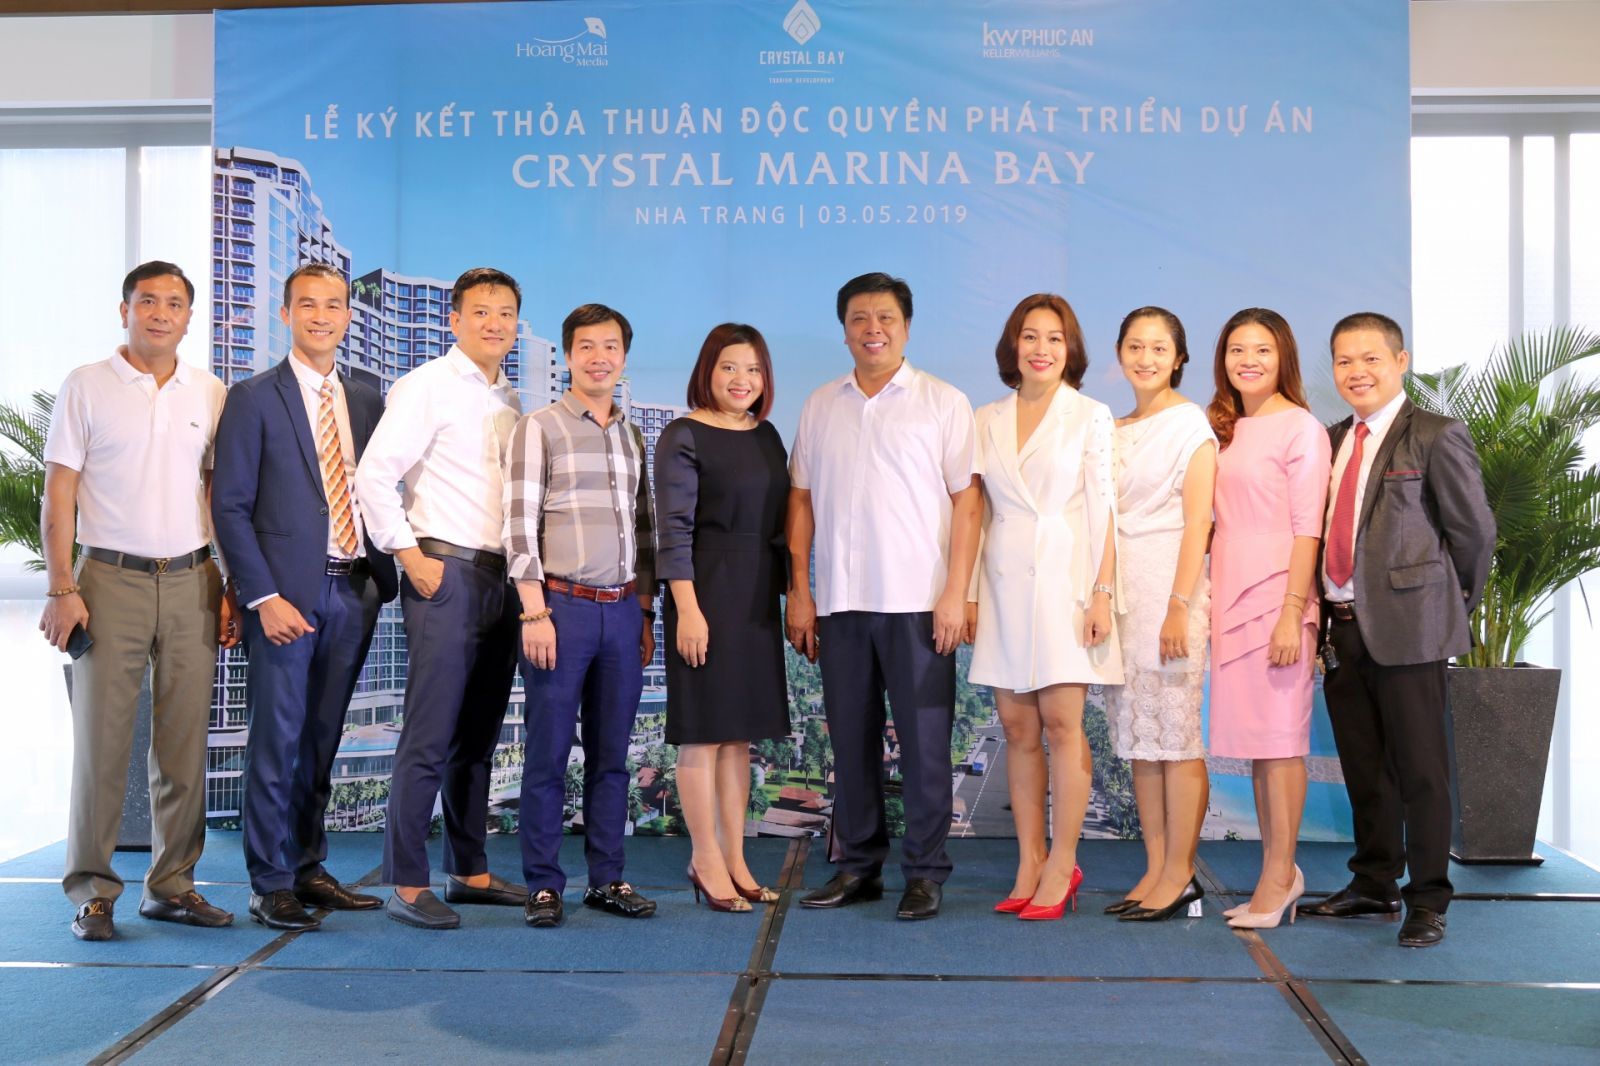 The development of Crystal Marina Bay will significantly solve the great demand of international high-class tourists to Nha Trang.